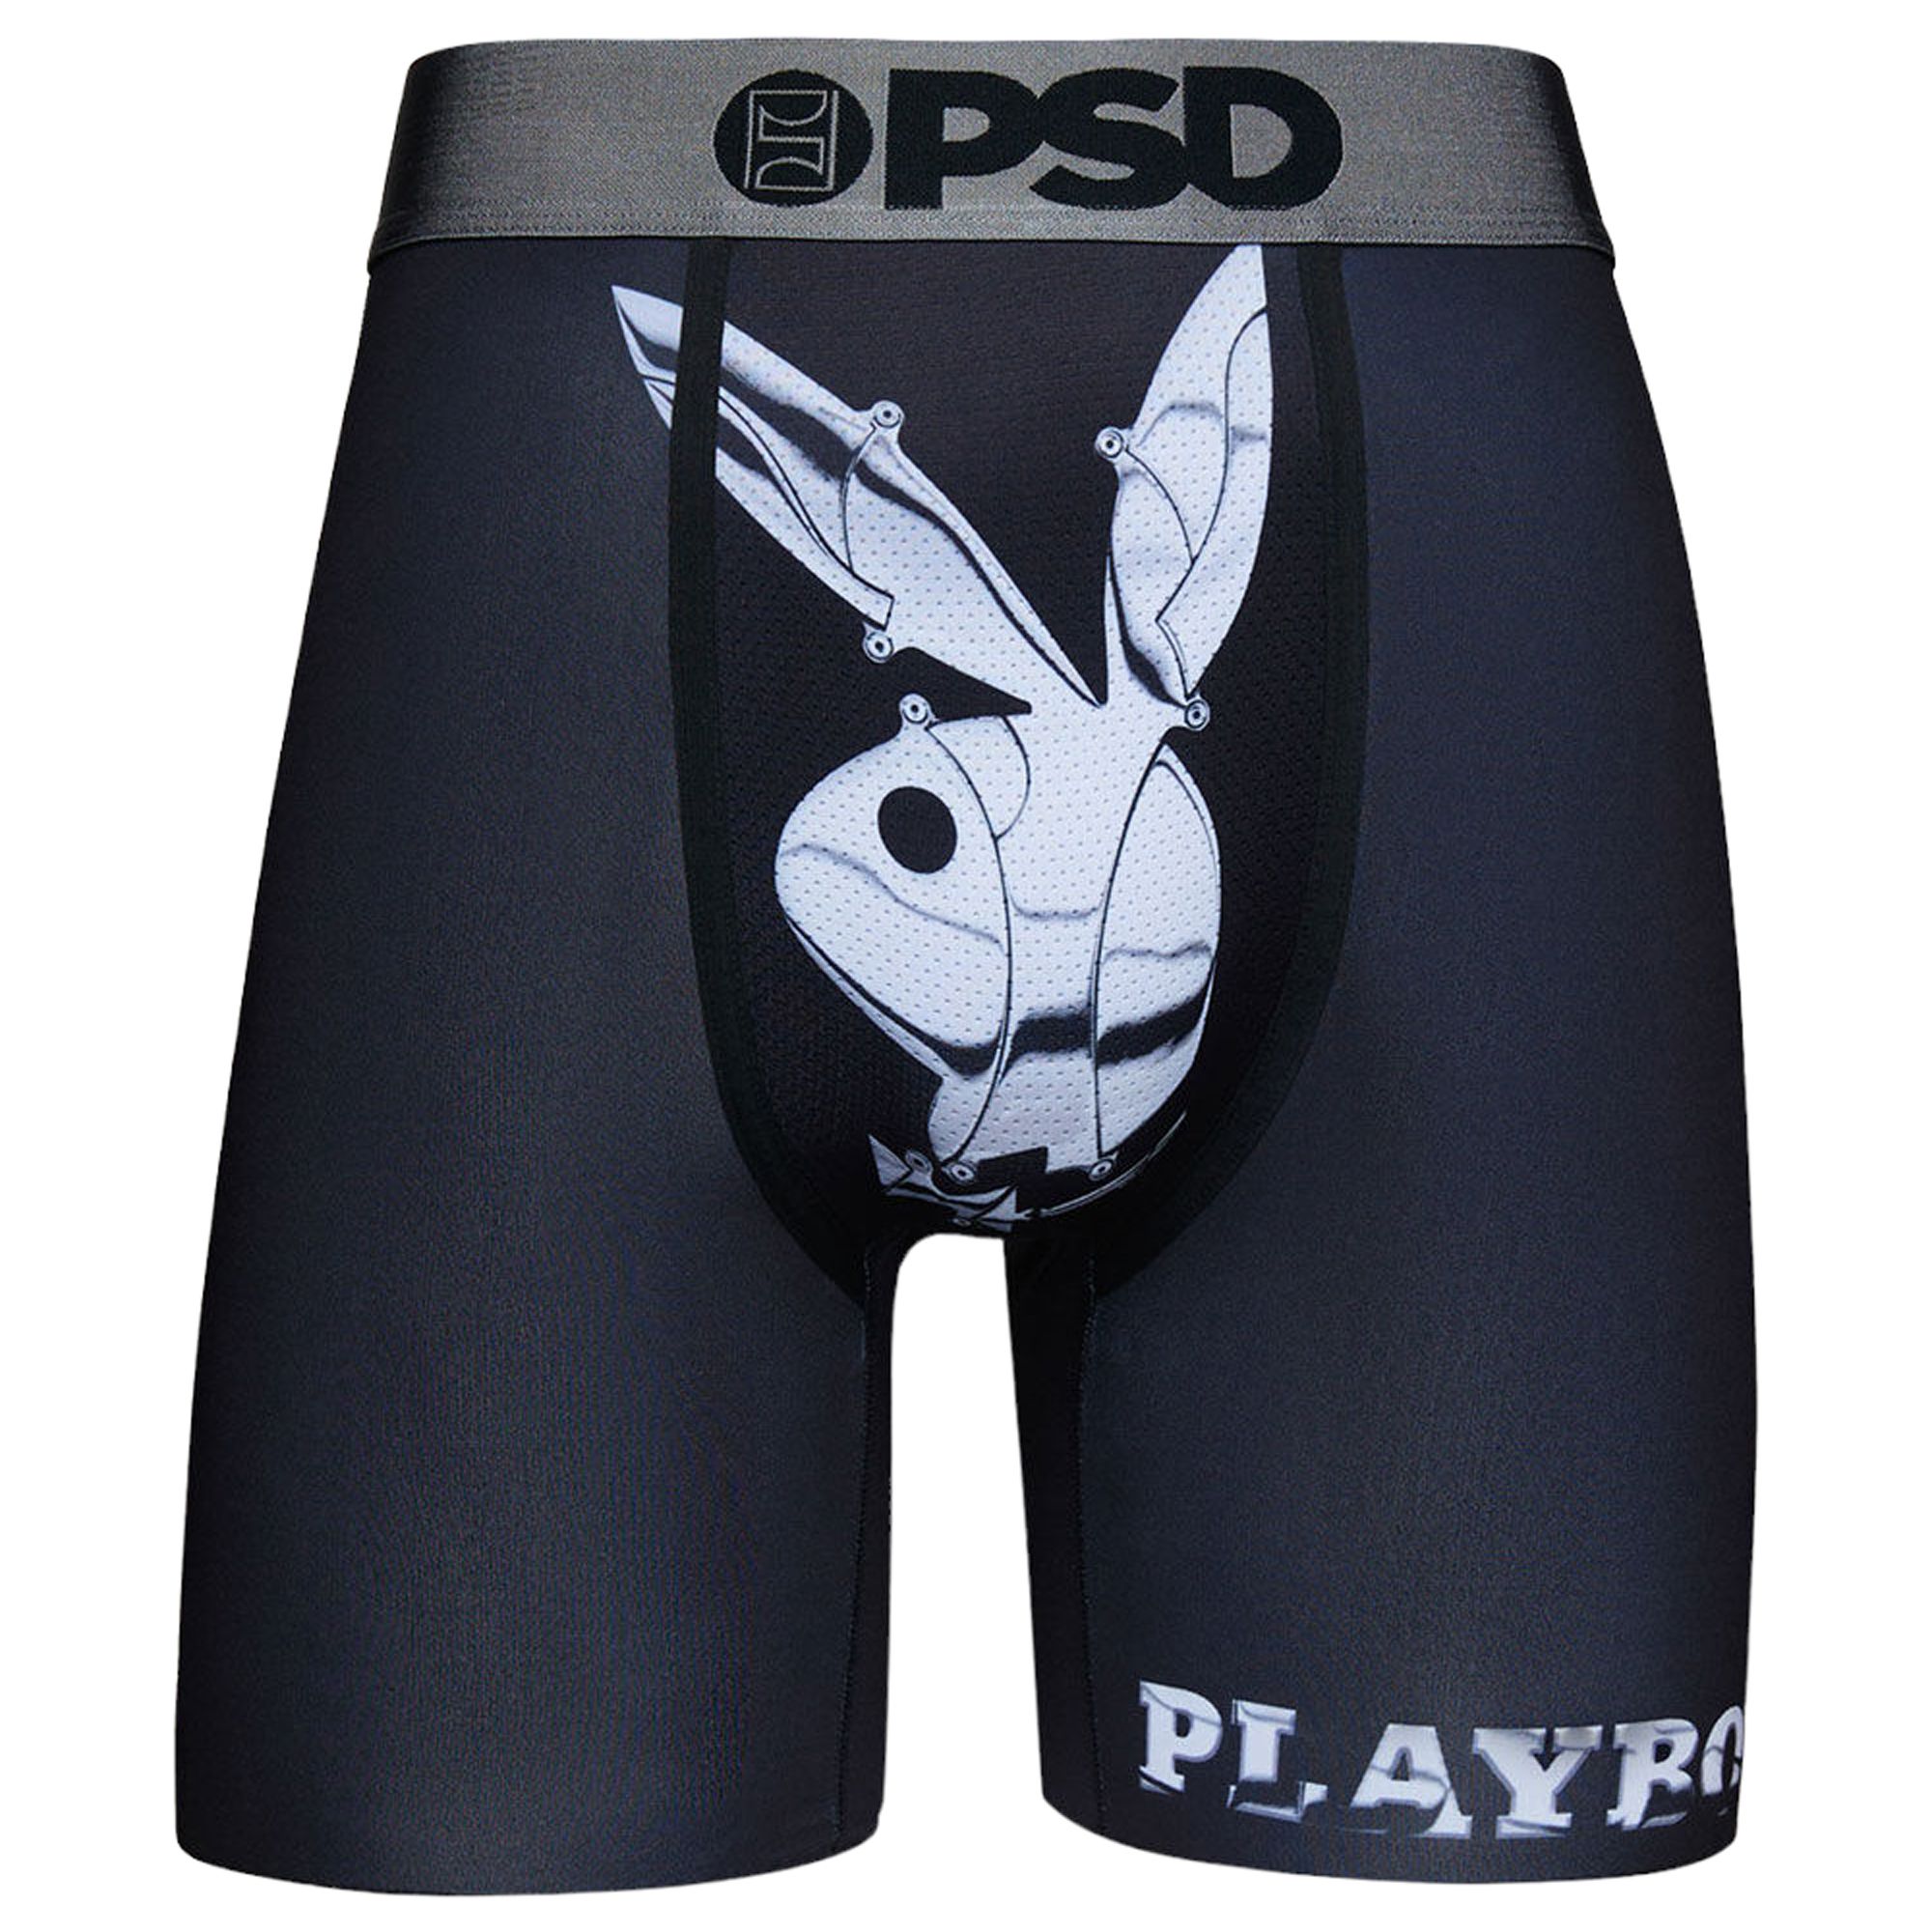 PSD Mens Boxer Briefs Another Dimension Size SMALL (28 to 30)